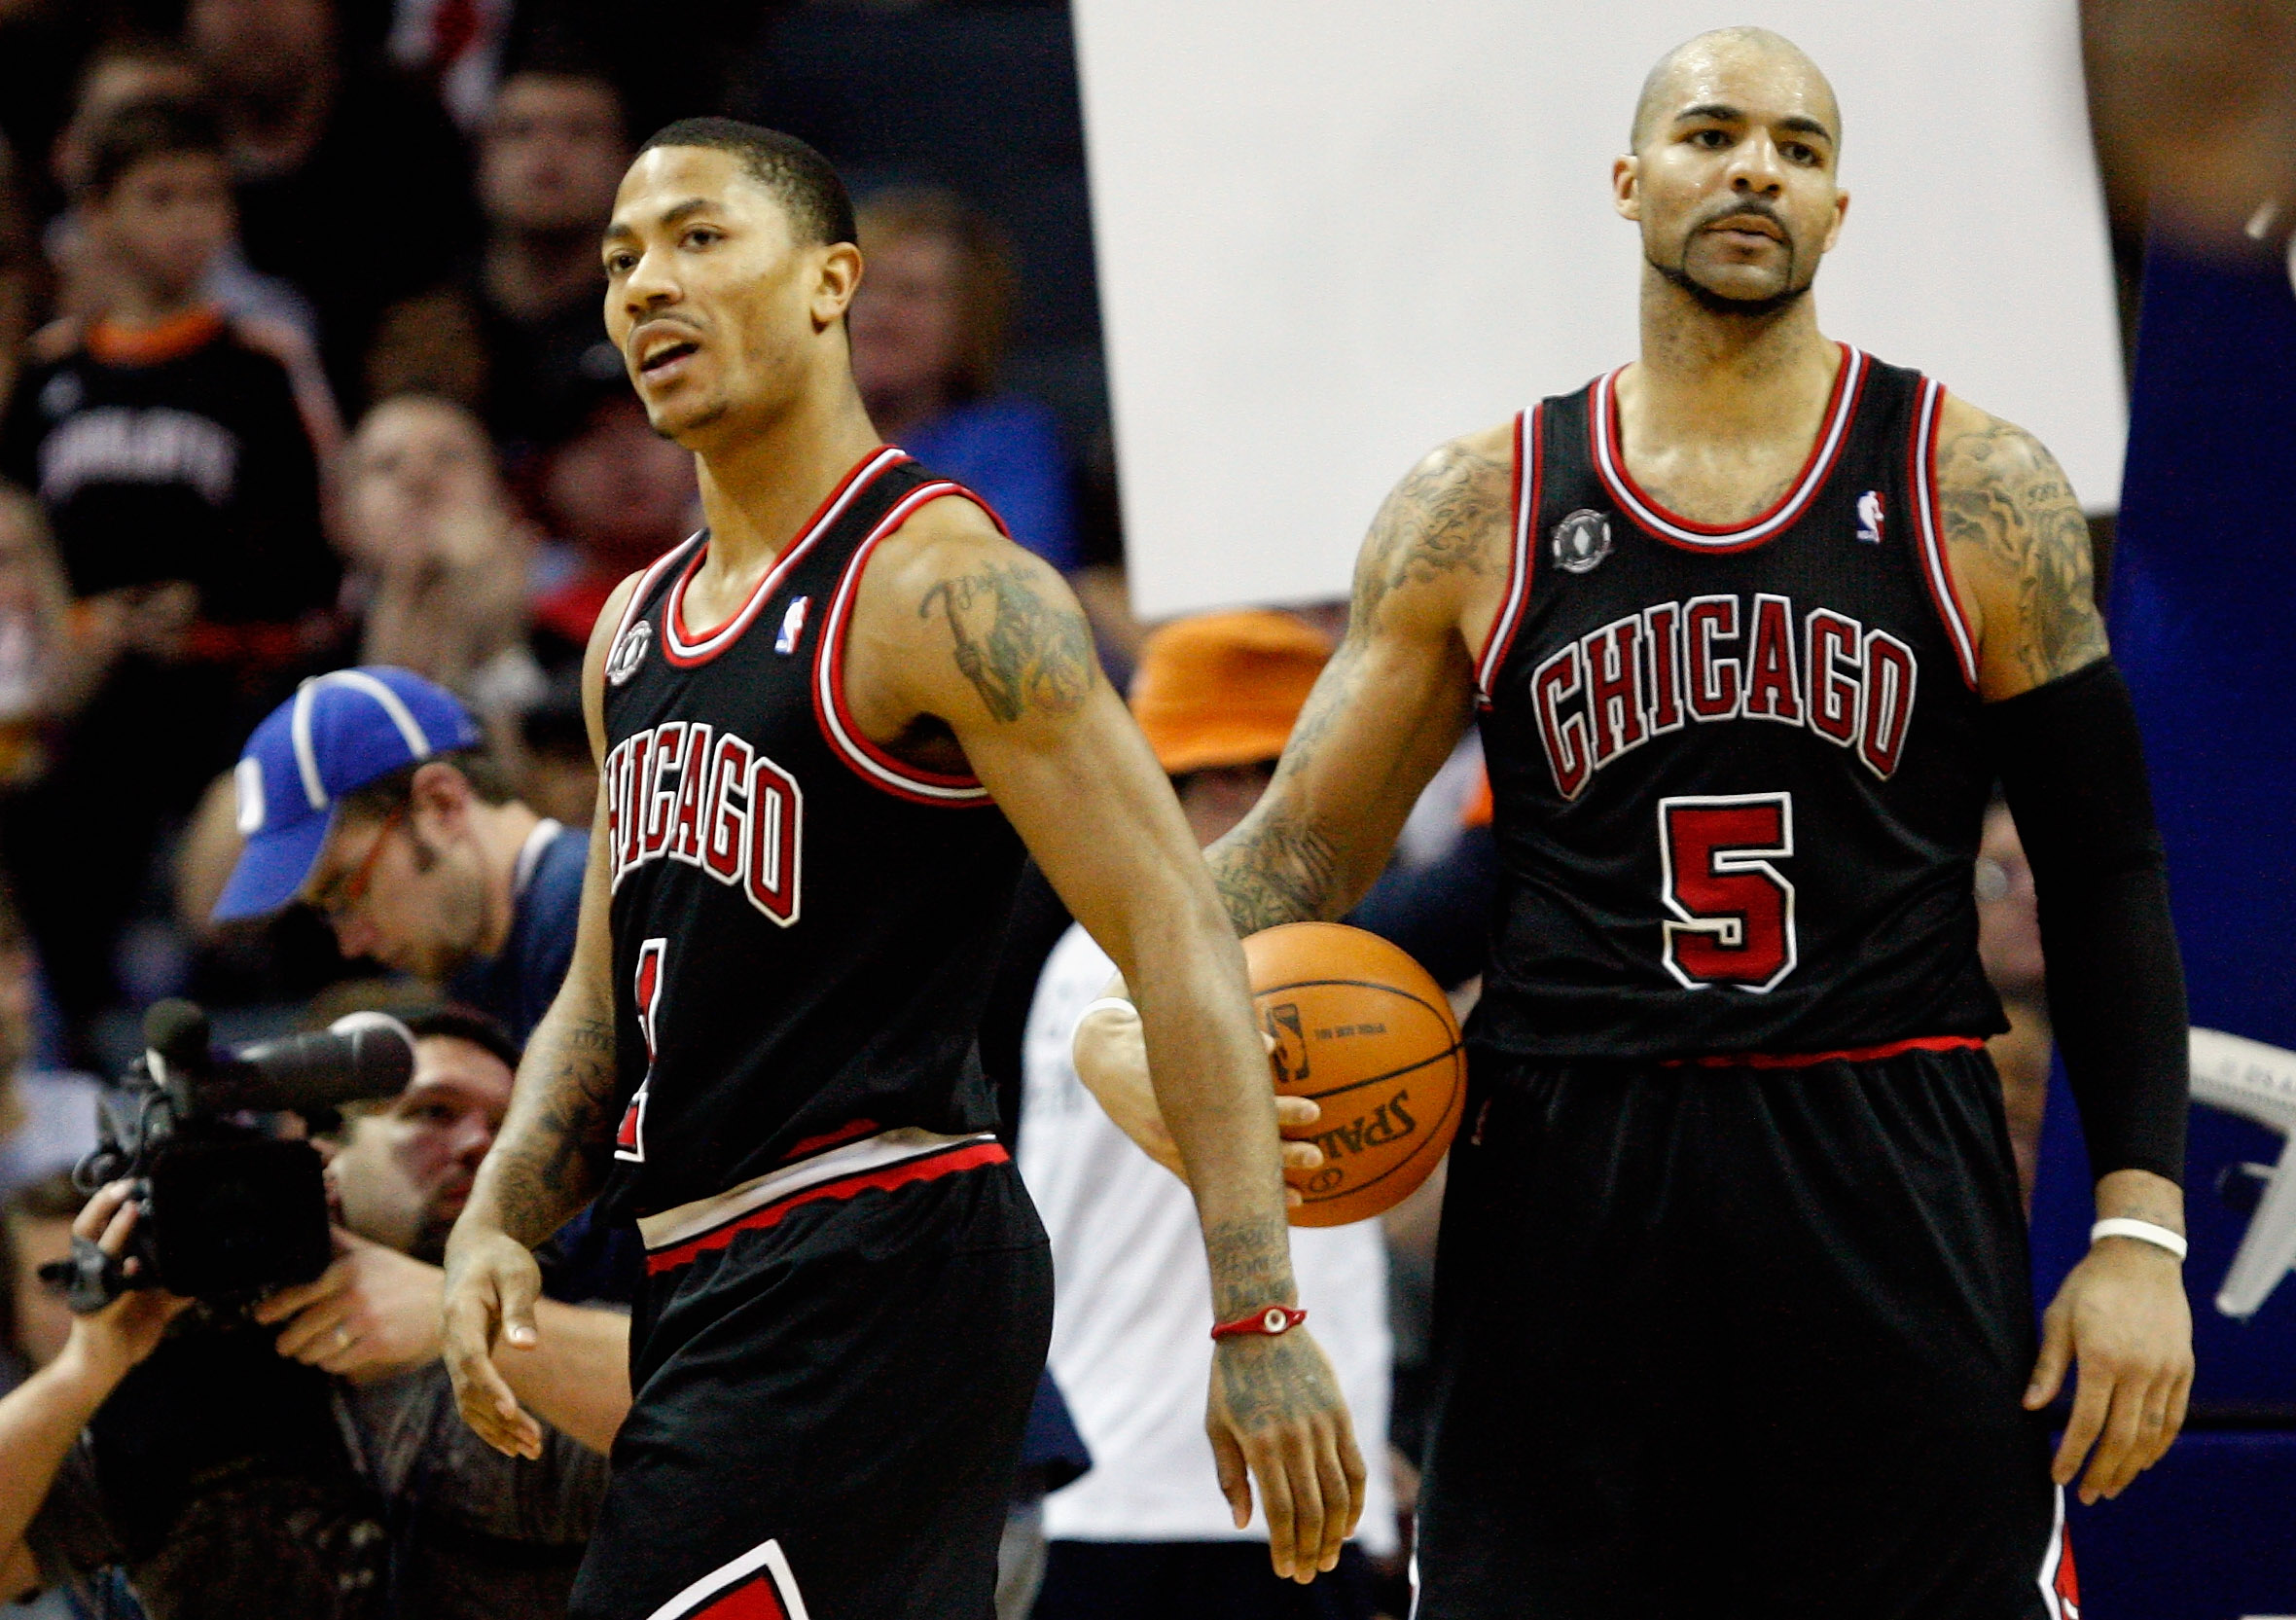 CHARLOTTE, NC - JANUARY 12:  Teammates Derrick Rose #1 and Carlos Boozer #5 of the Chicago Bulls reacts after a  play against the Charlotte Bobcats during their game at Time Warner Cable Arena on January 12, 2011 in Charlotte, North Carolina. NOTE TO USER